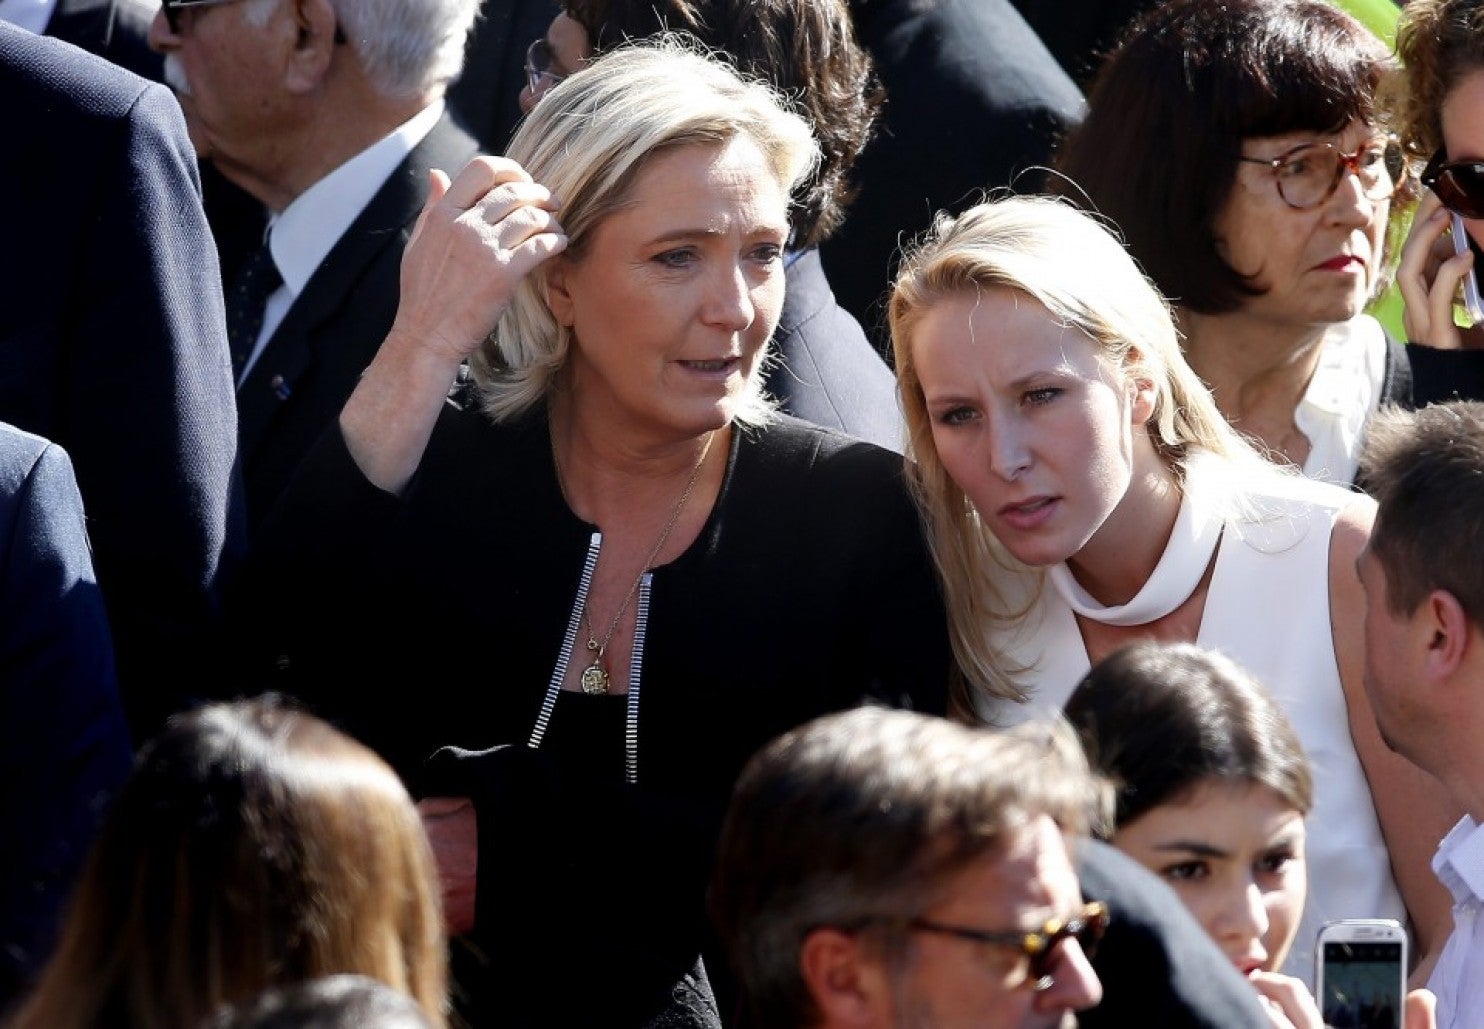 Marine Le Pen, leader of the National Front, and her niece Marion Maréchal-Le Pen are leading the charge of the far-right in France